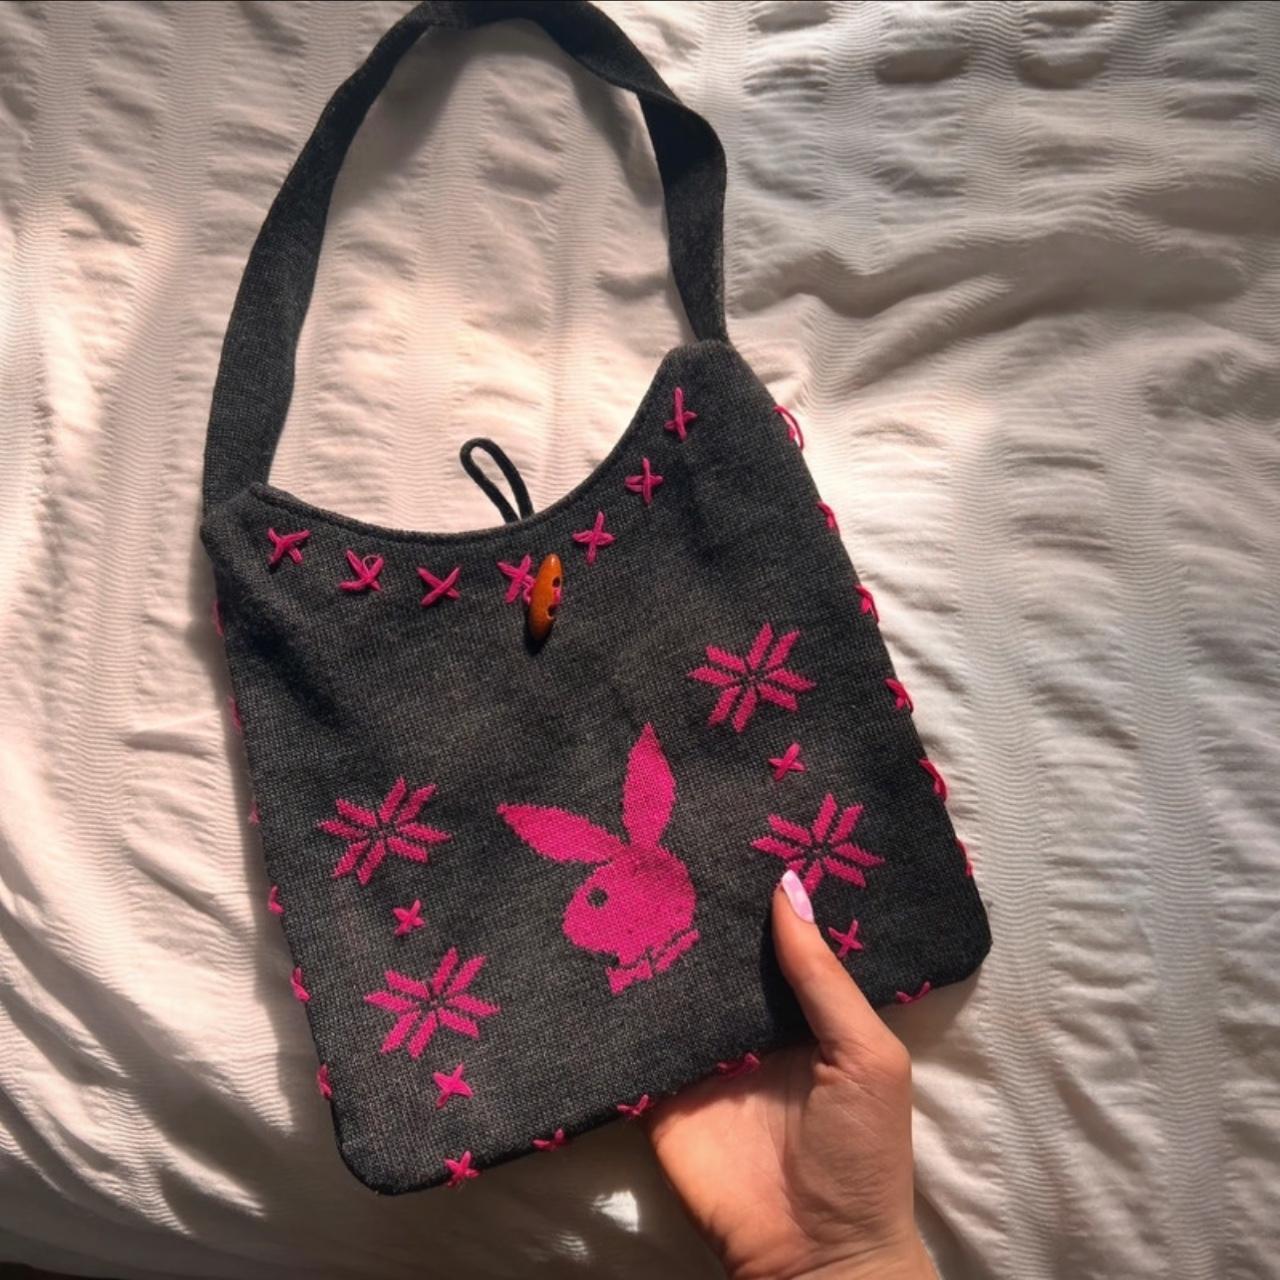 Playboy TOILETRY / BEAUTY BAG, Black Vinyl and Pink 100% Polyester Lining,  aprox 11